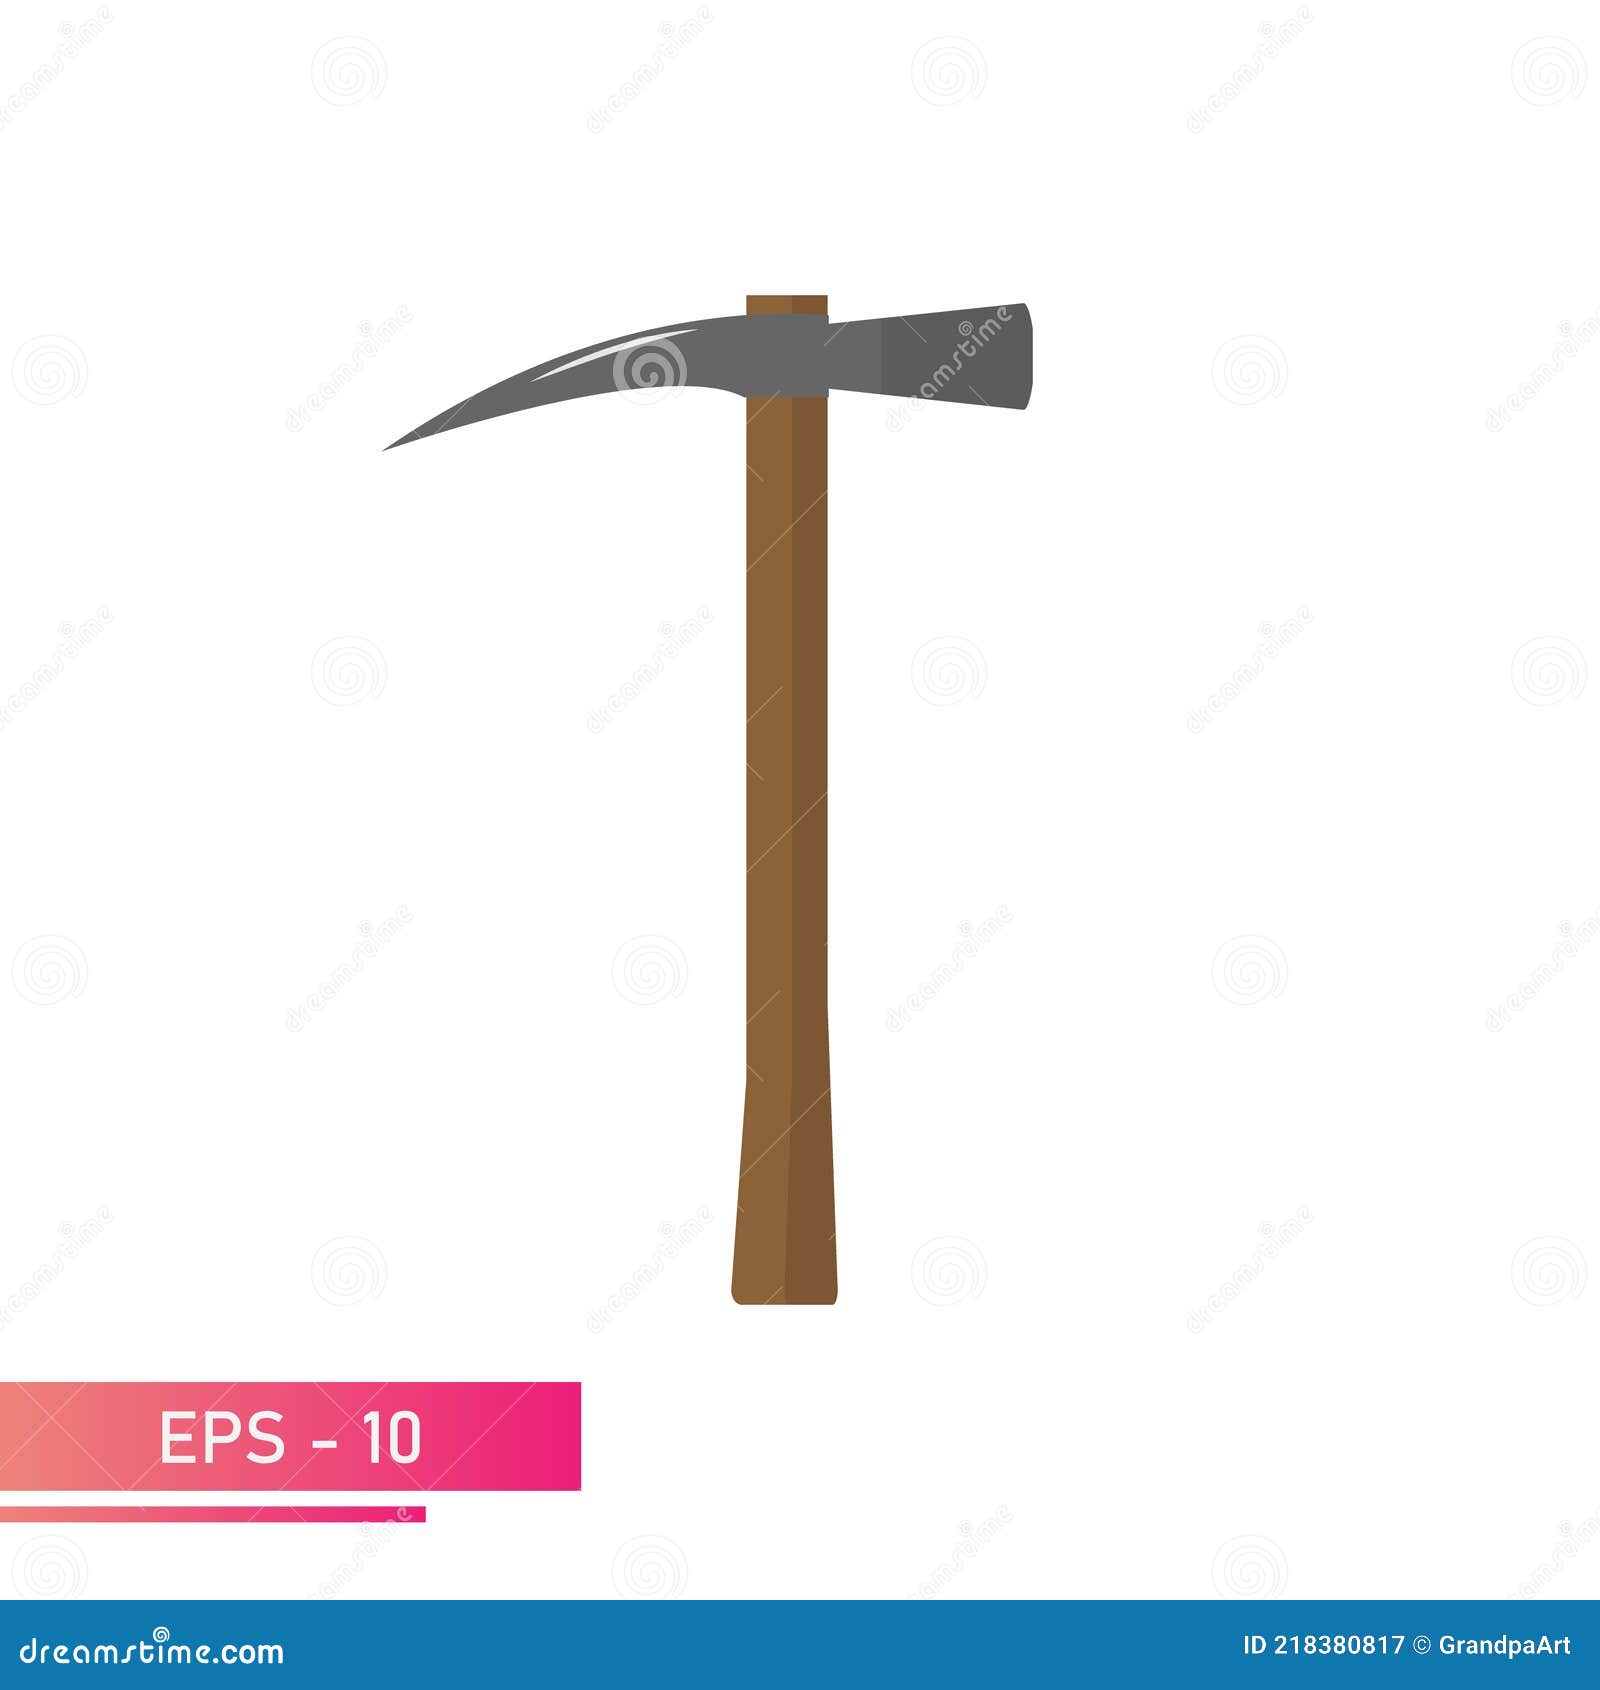 Hammer with wooden handle on white background Vector Image